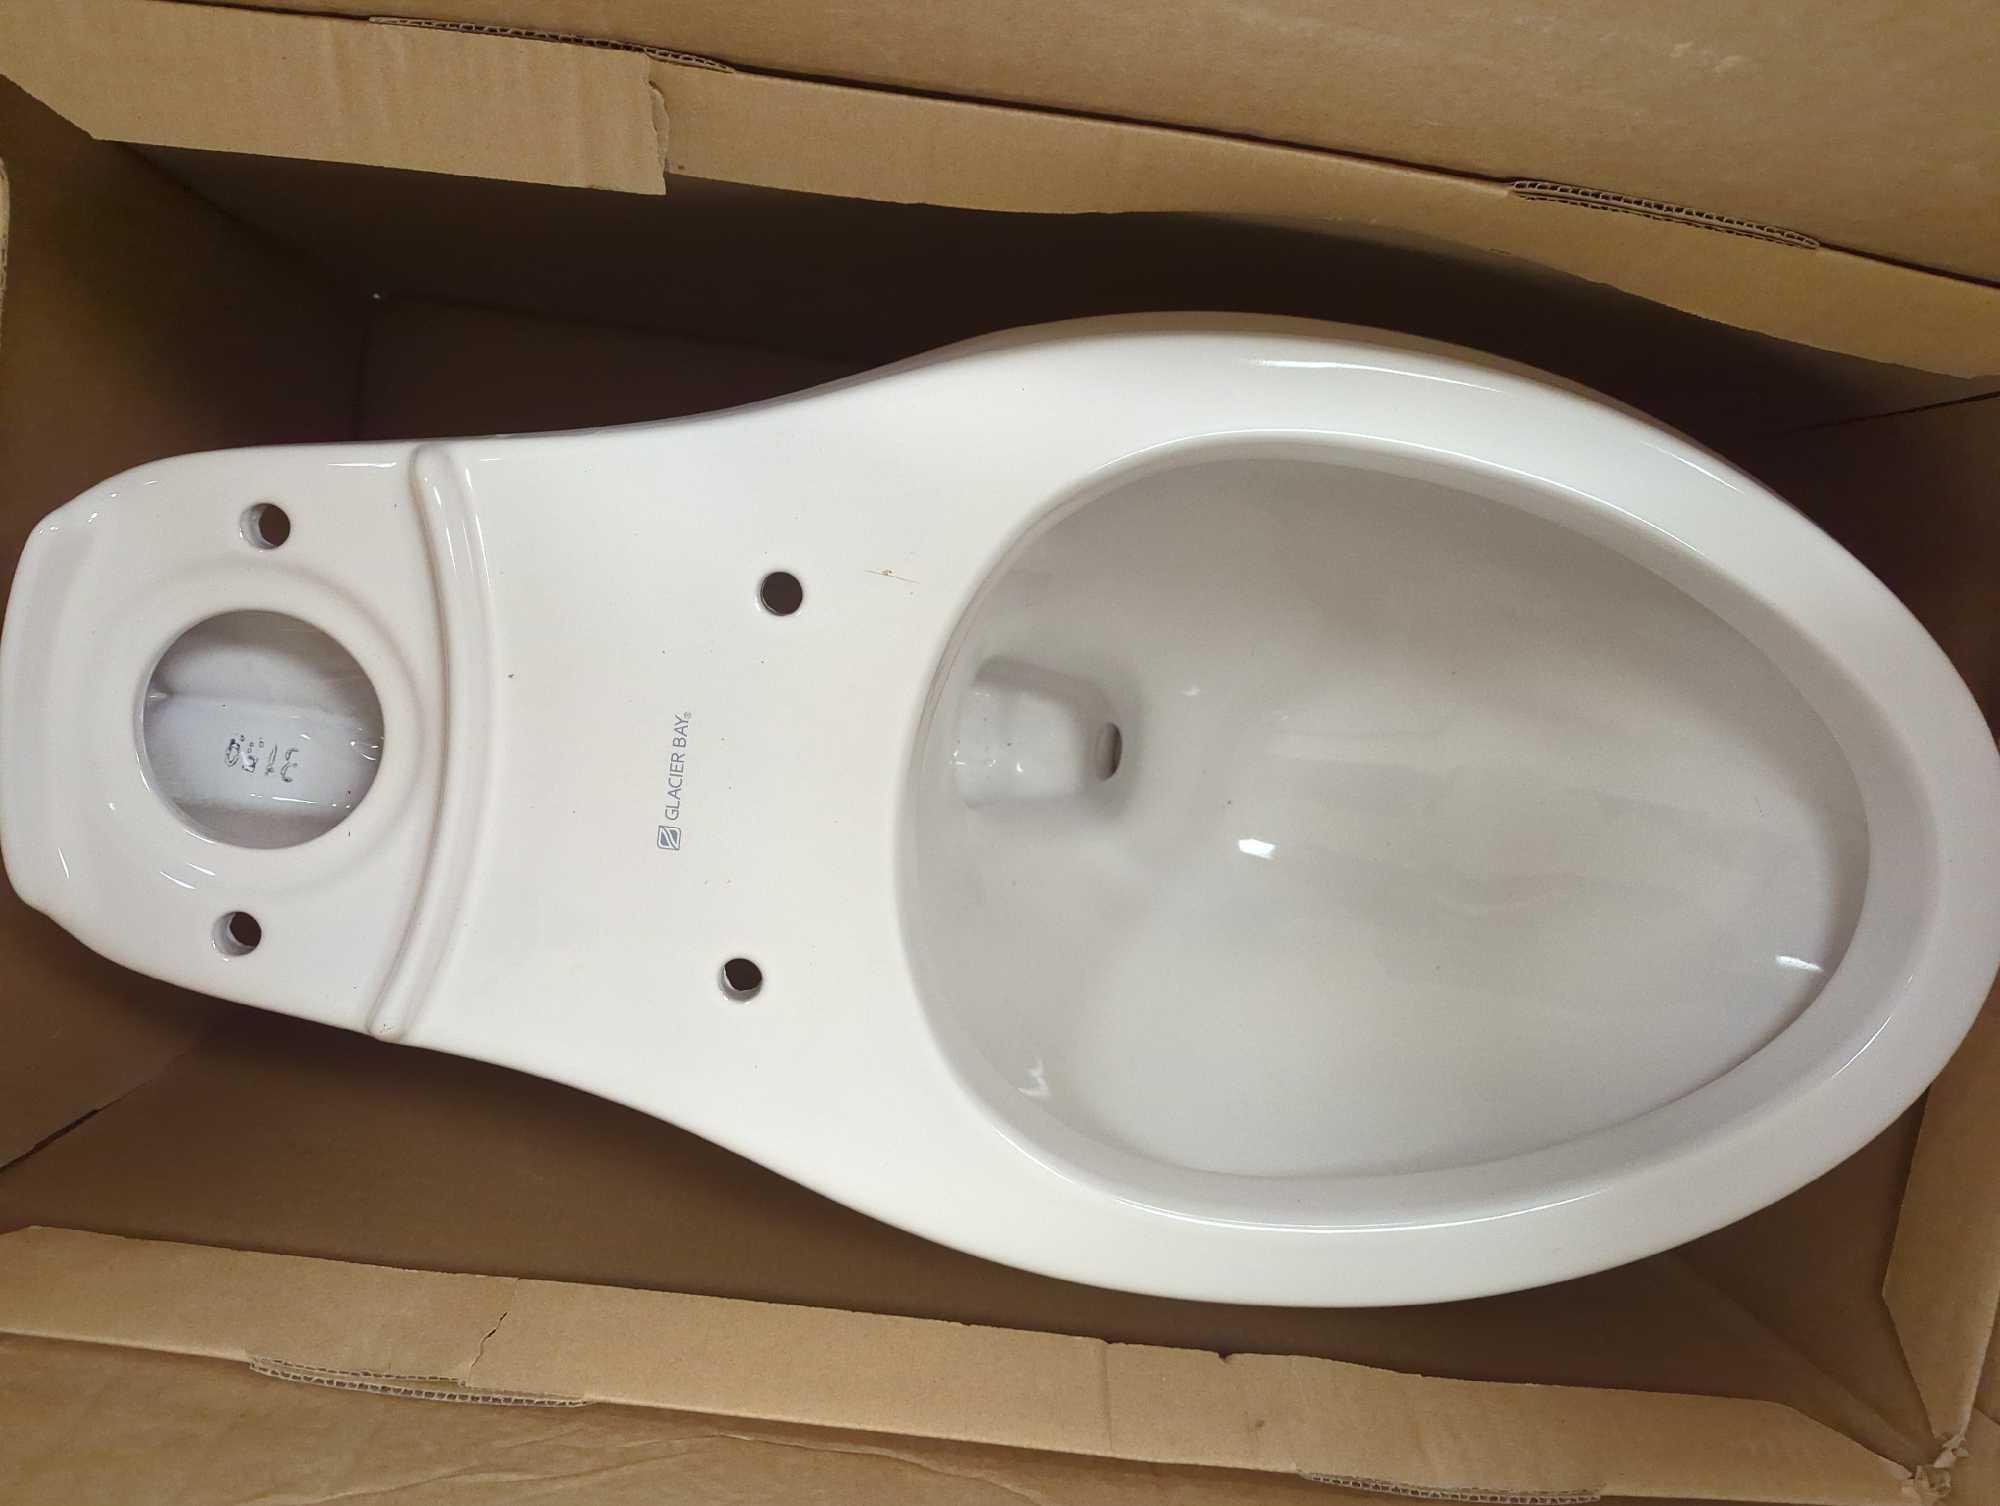 Glacier Bay 2-piece 1.1 GPF/1.6 GPF High Efficiency Dual Flush Complete Elongated Toilet in White,